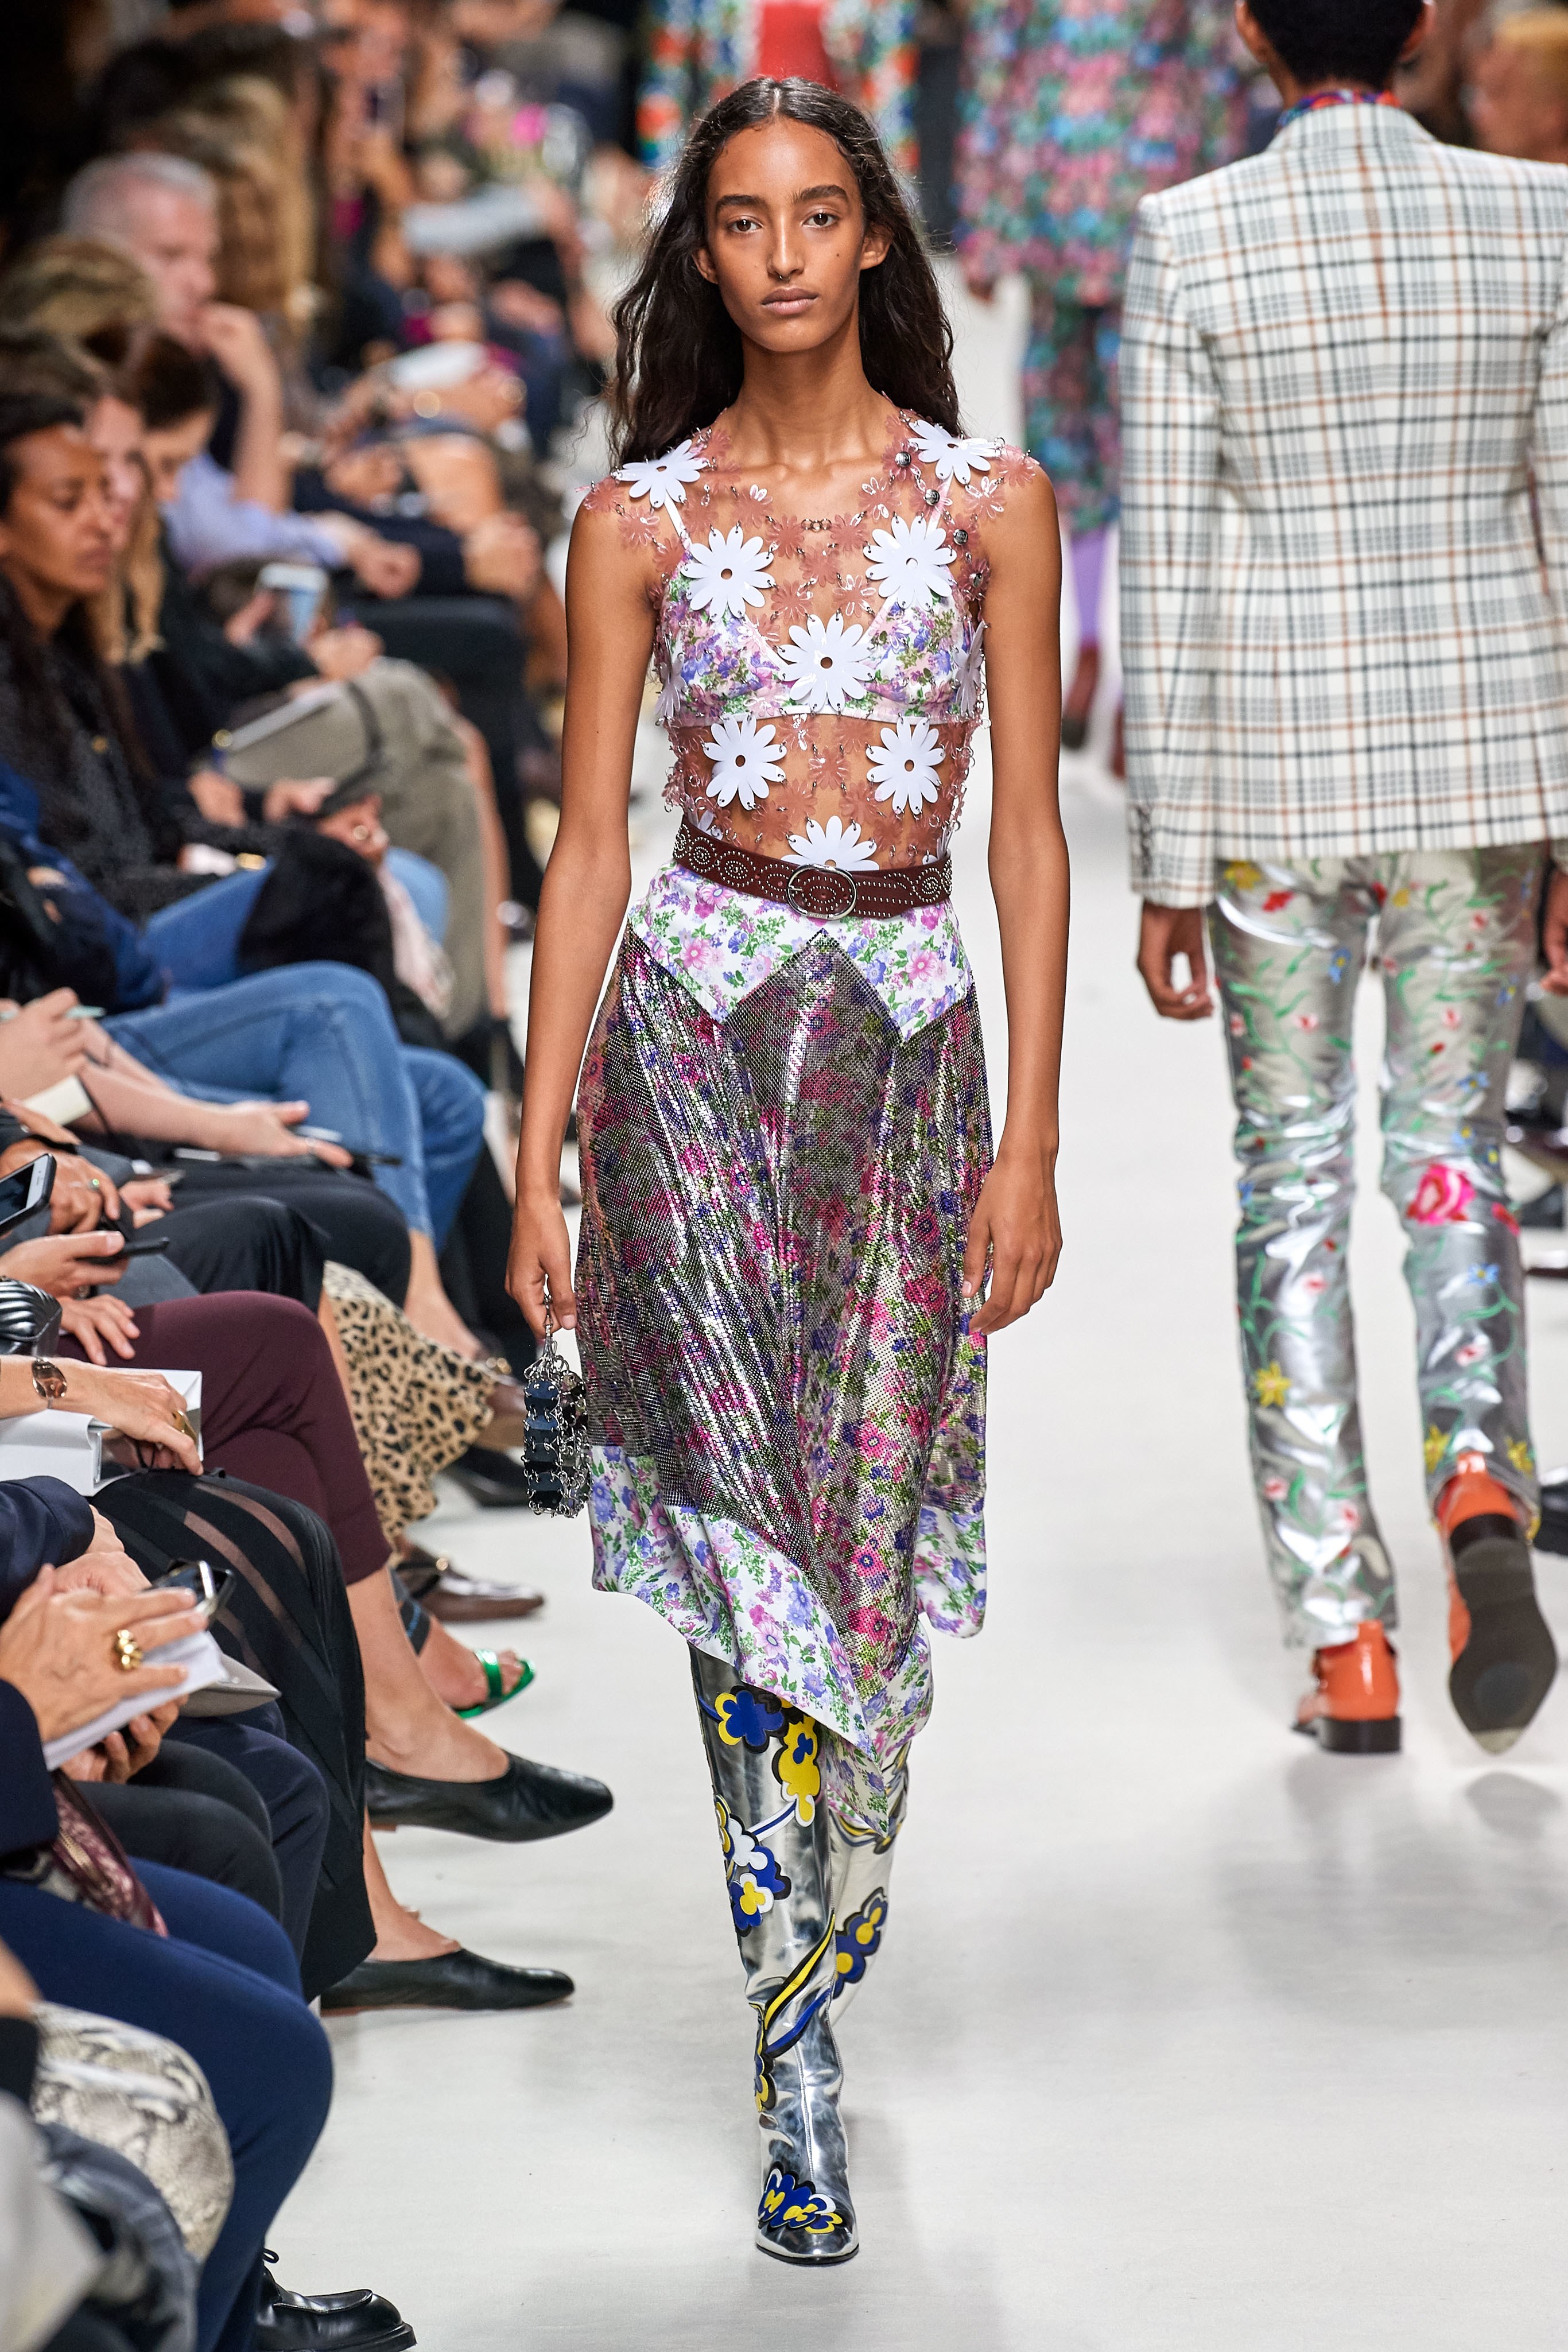 Paco rabanne Spring Summer 2020 SS2020 trends runway coverage Ready To Wear Vogue lame 60s wallpaper